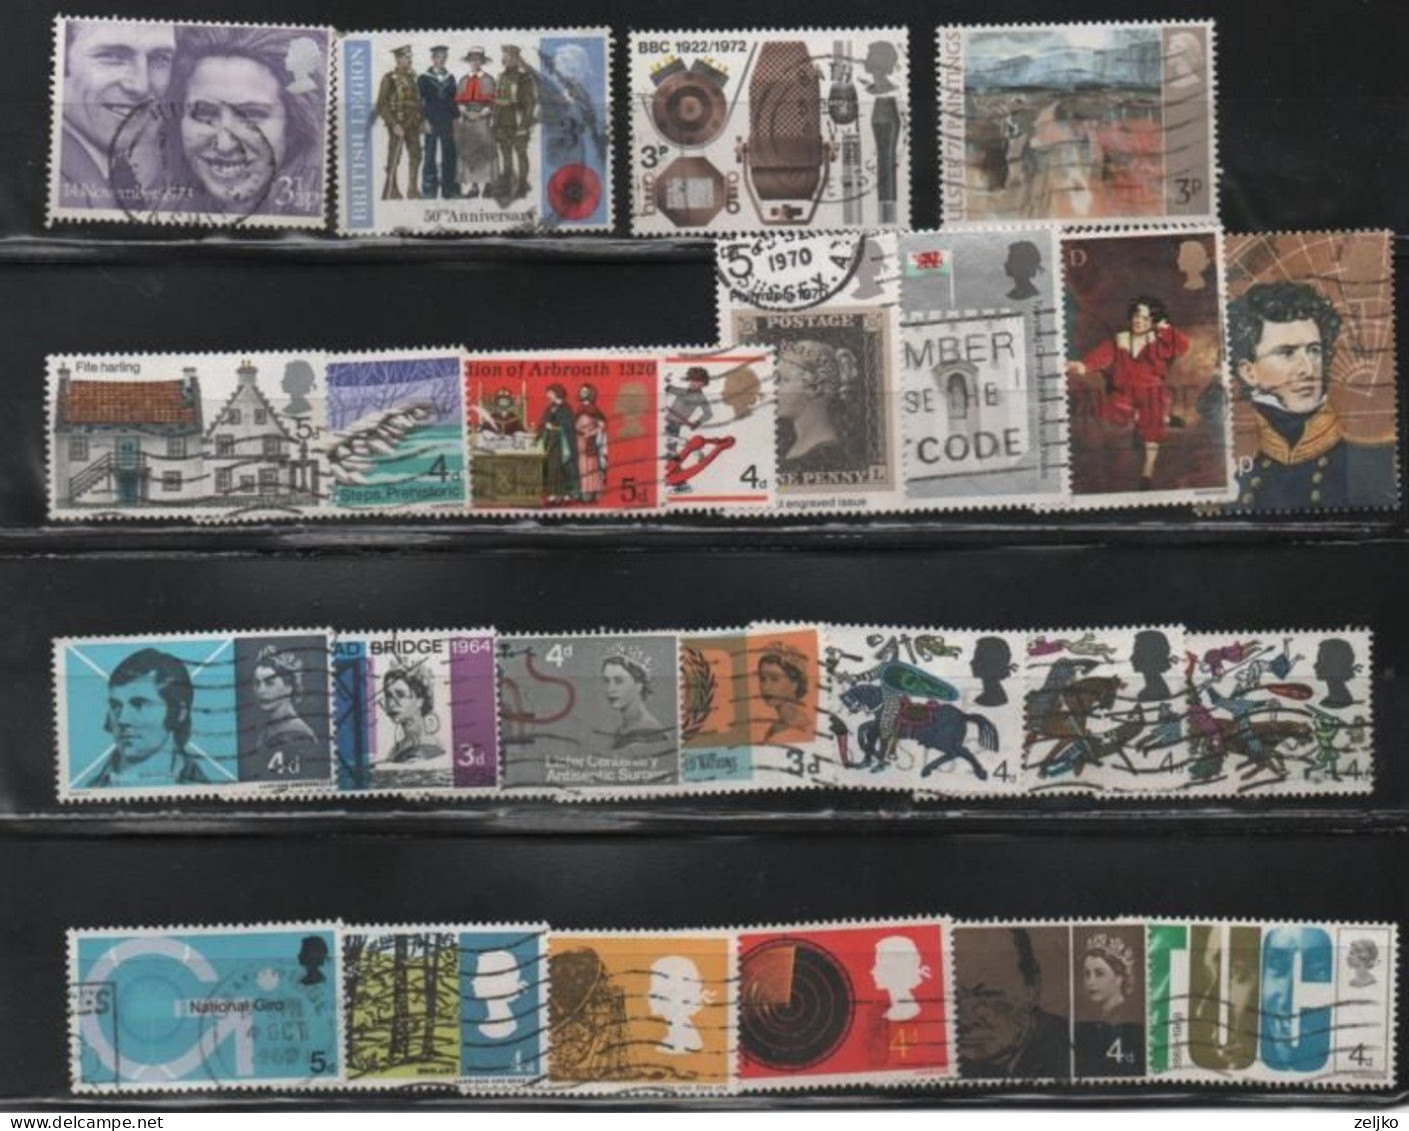 UK, GB, Great Britain, Lot Of 25 Used Stamps - Alla Rinfusa (max 999 Francobolli)